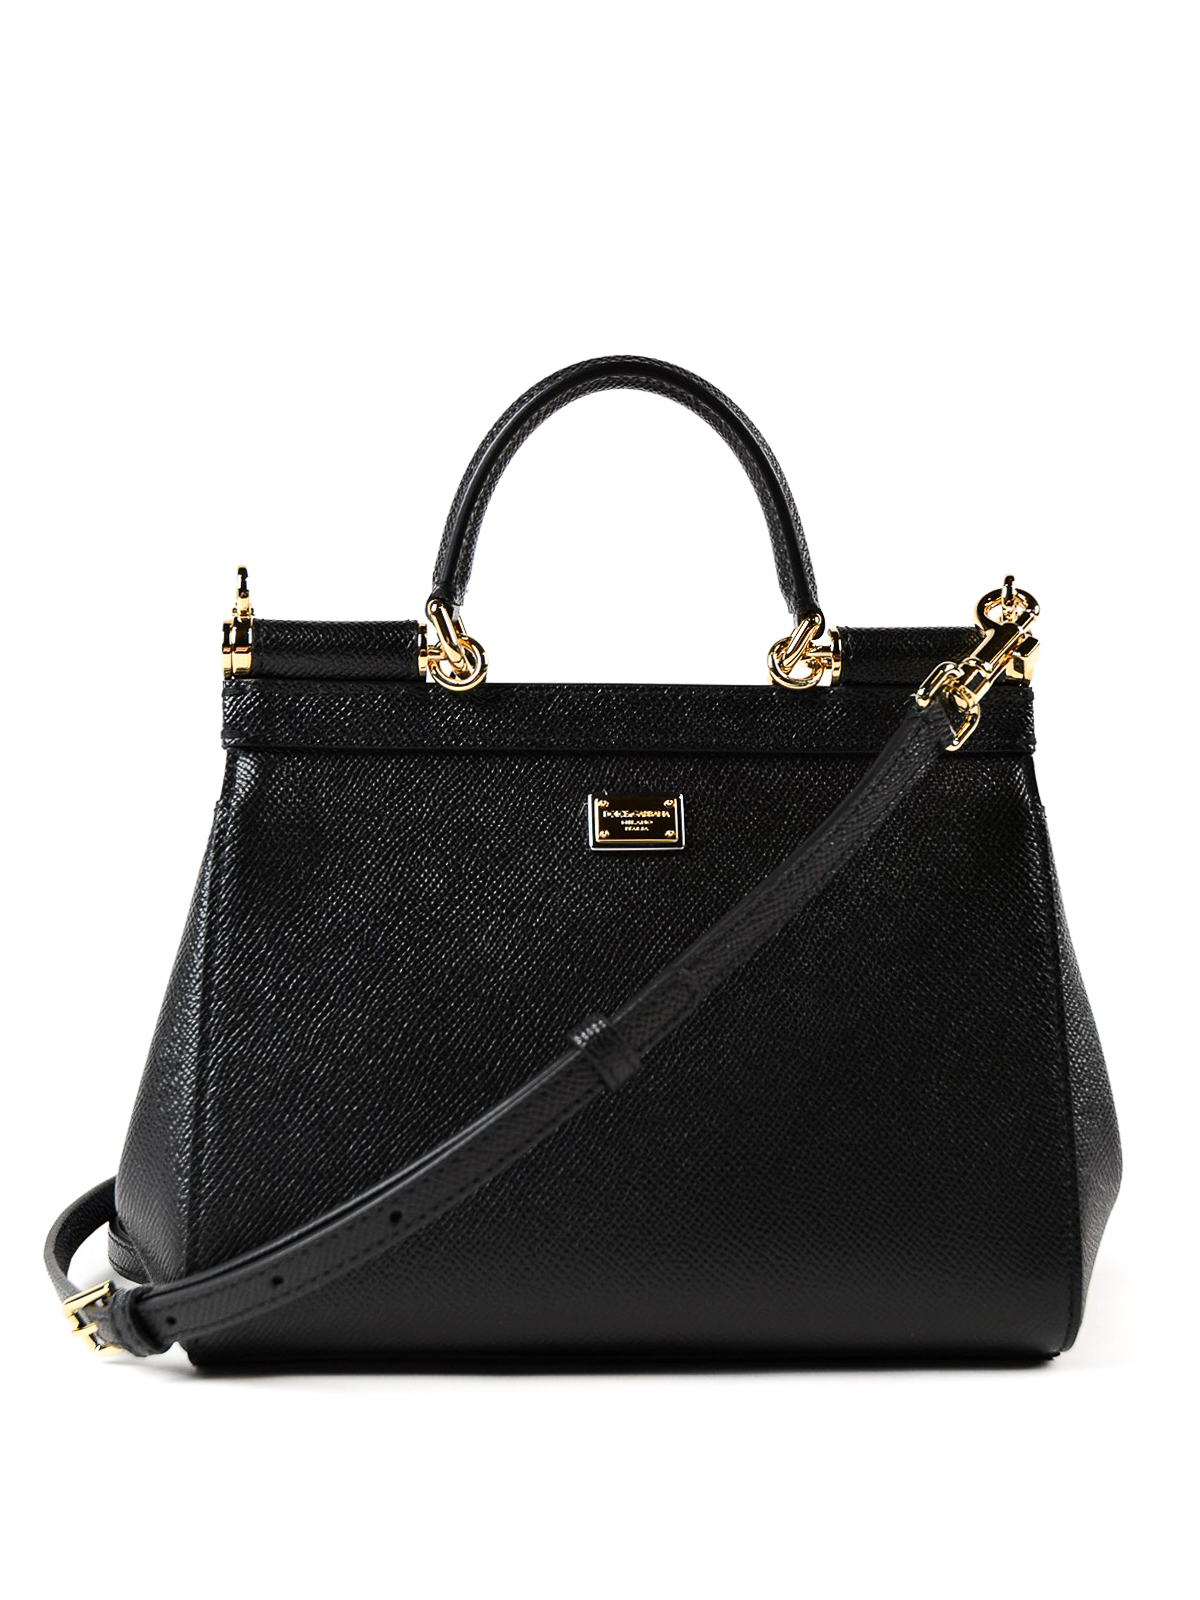 Dolce&Gabbana Grey Patent Leather Miss Sicily Small Bag